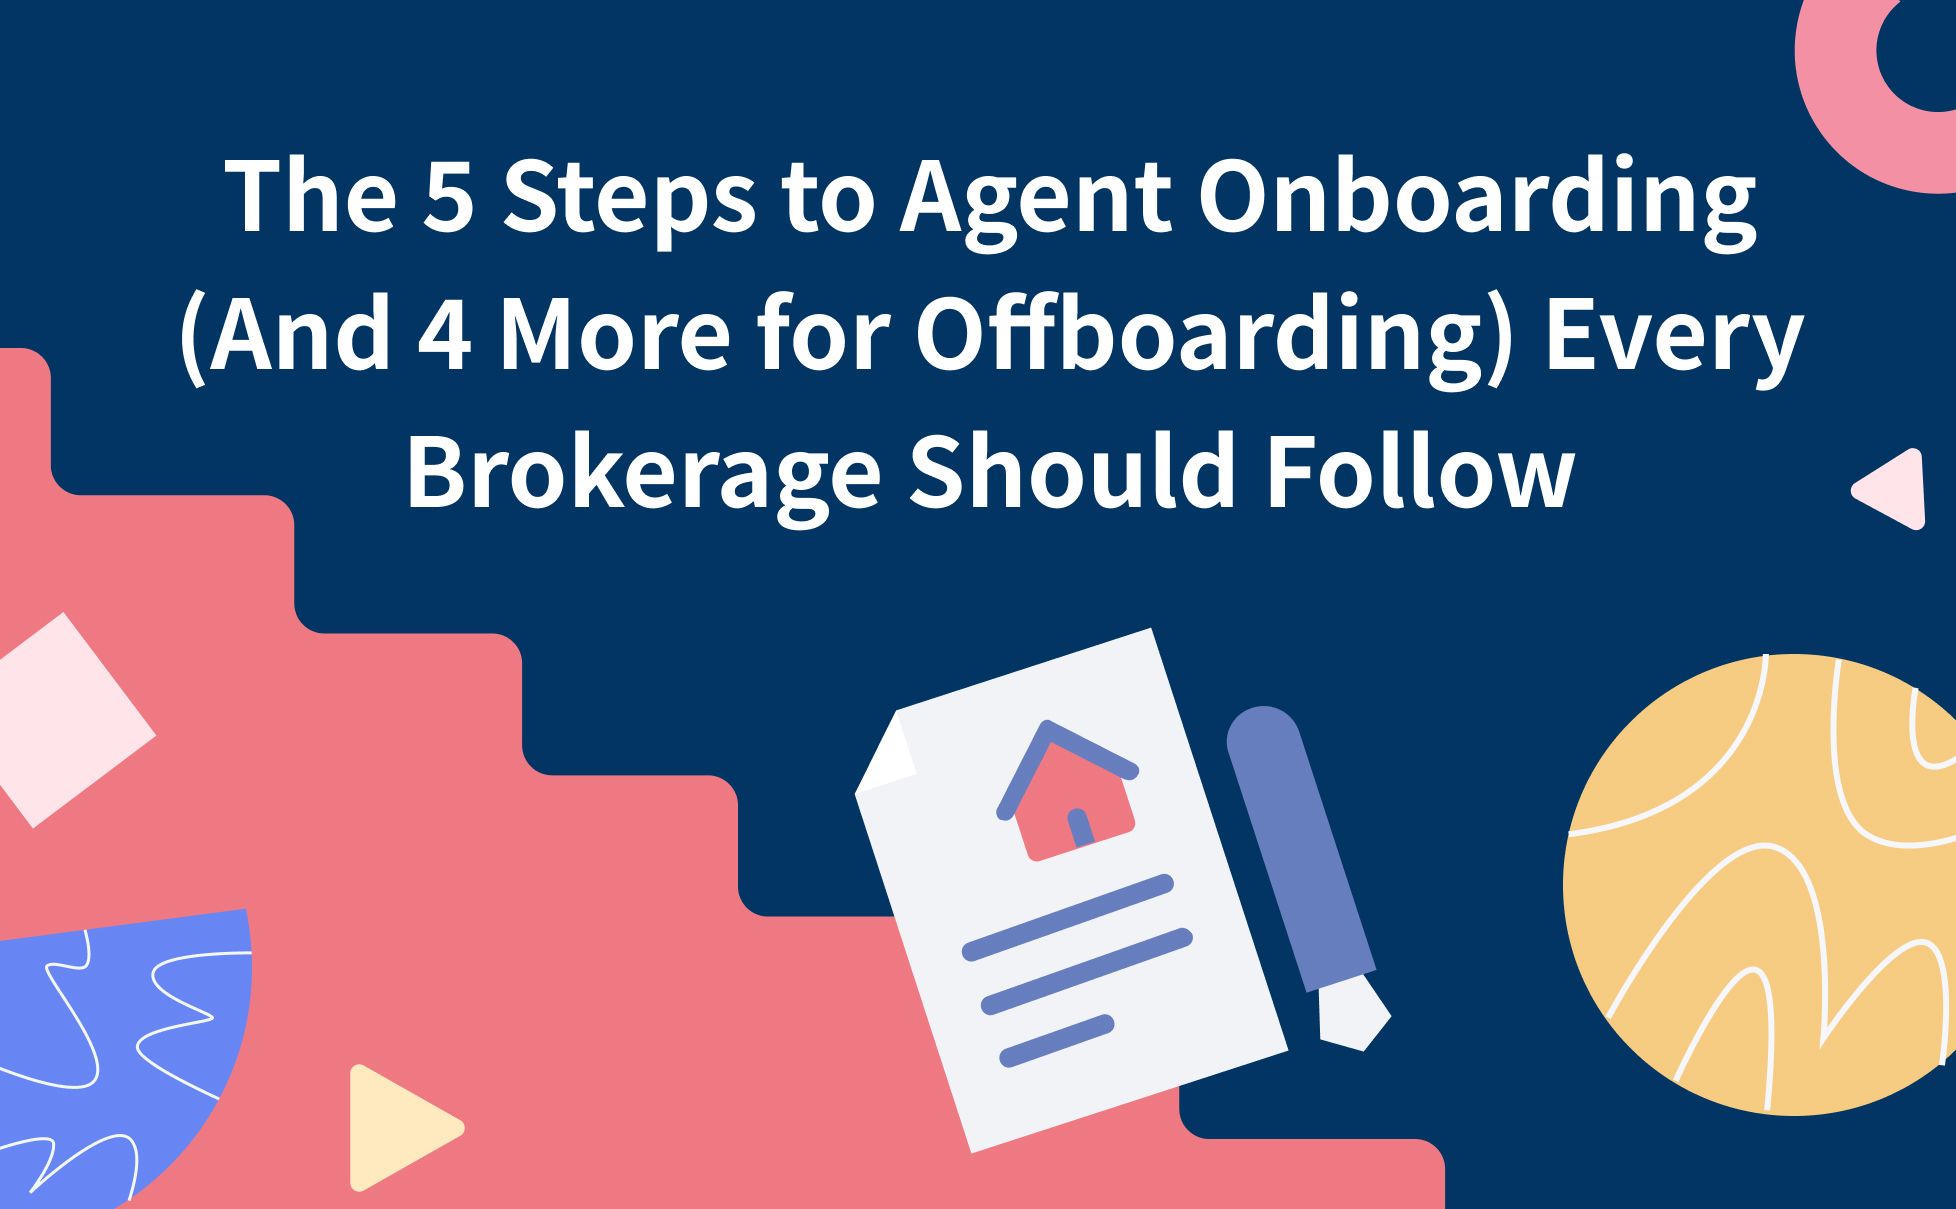 The 5 Steps to Agent Onboarding (And 4 More for Offboarding) Every Brokerage Should Follow